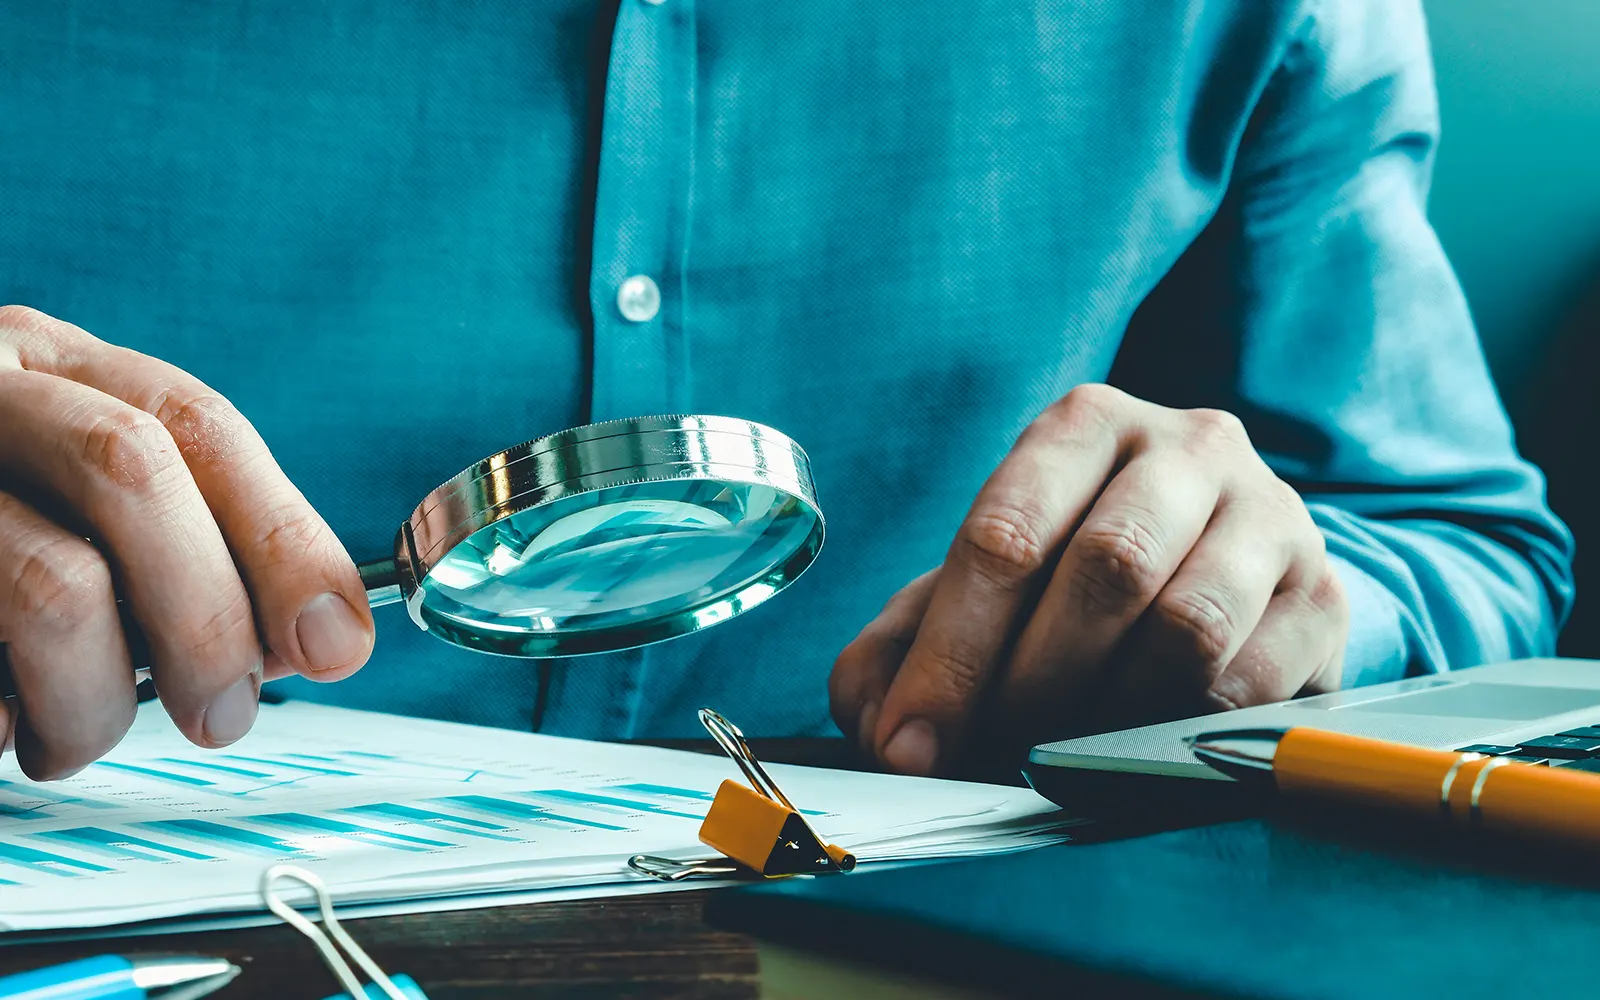 Hands holding a magnifying glass over a document